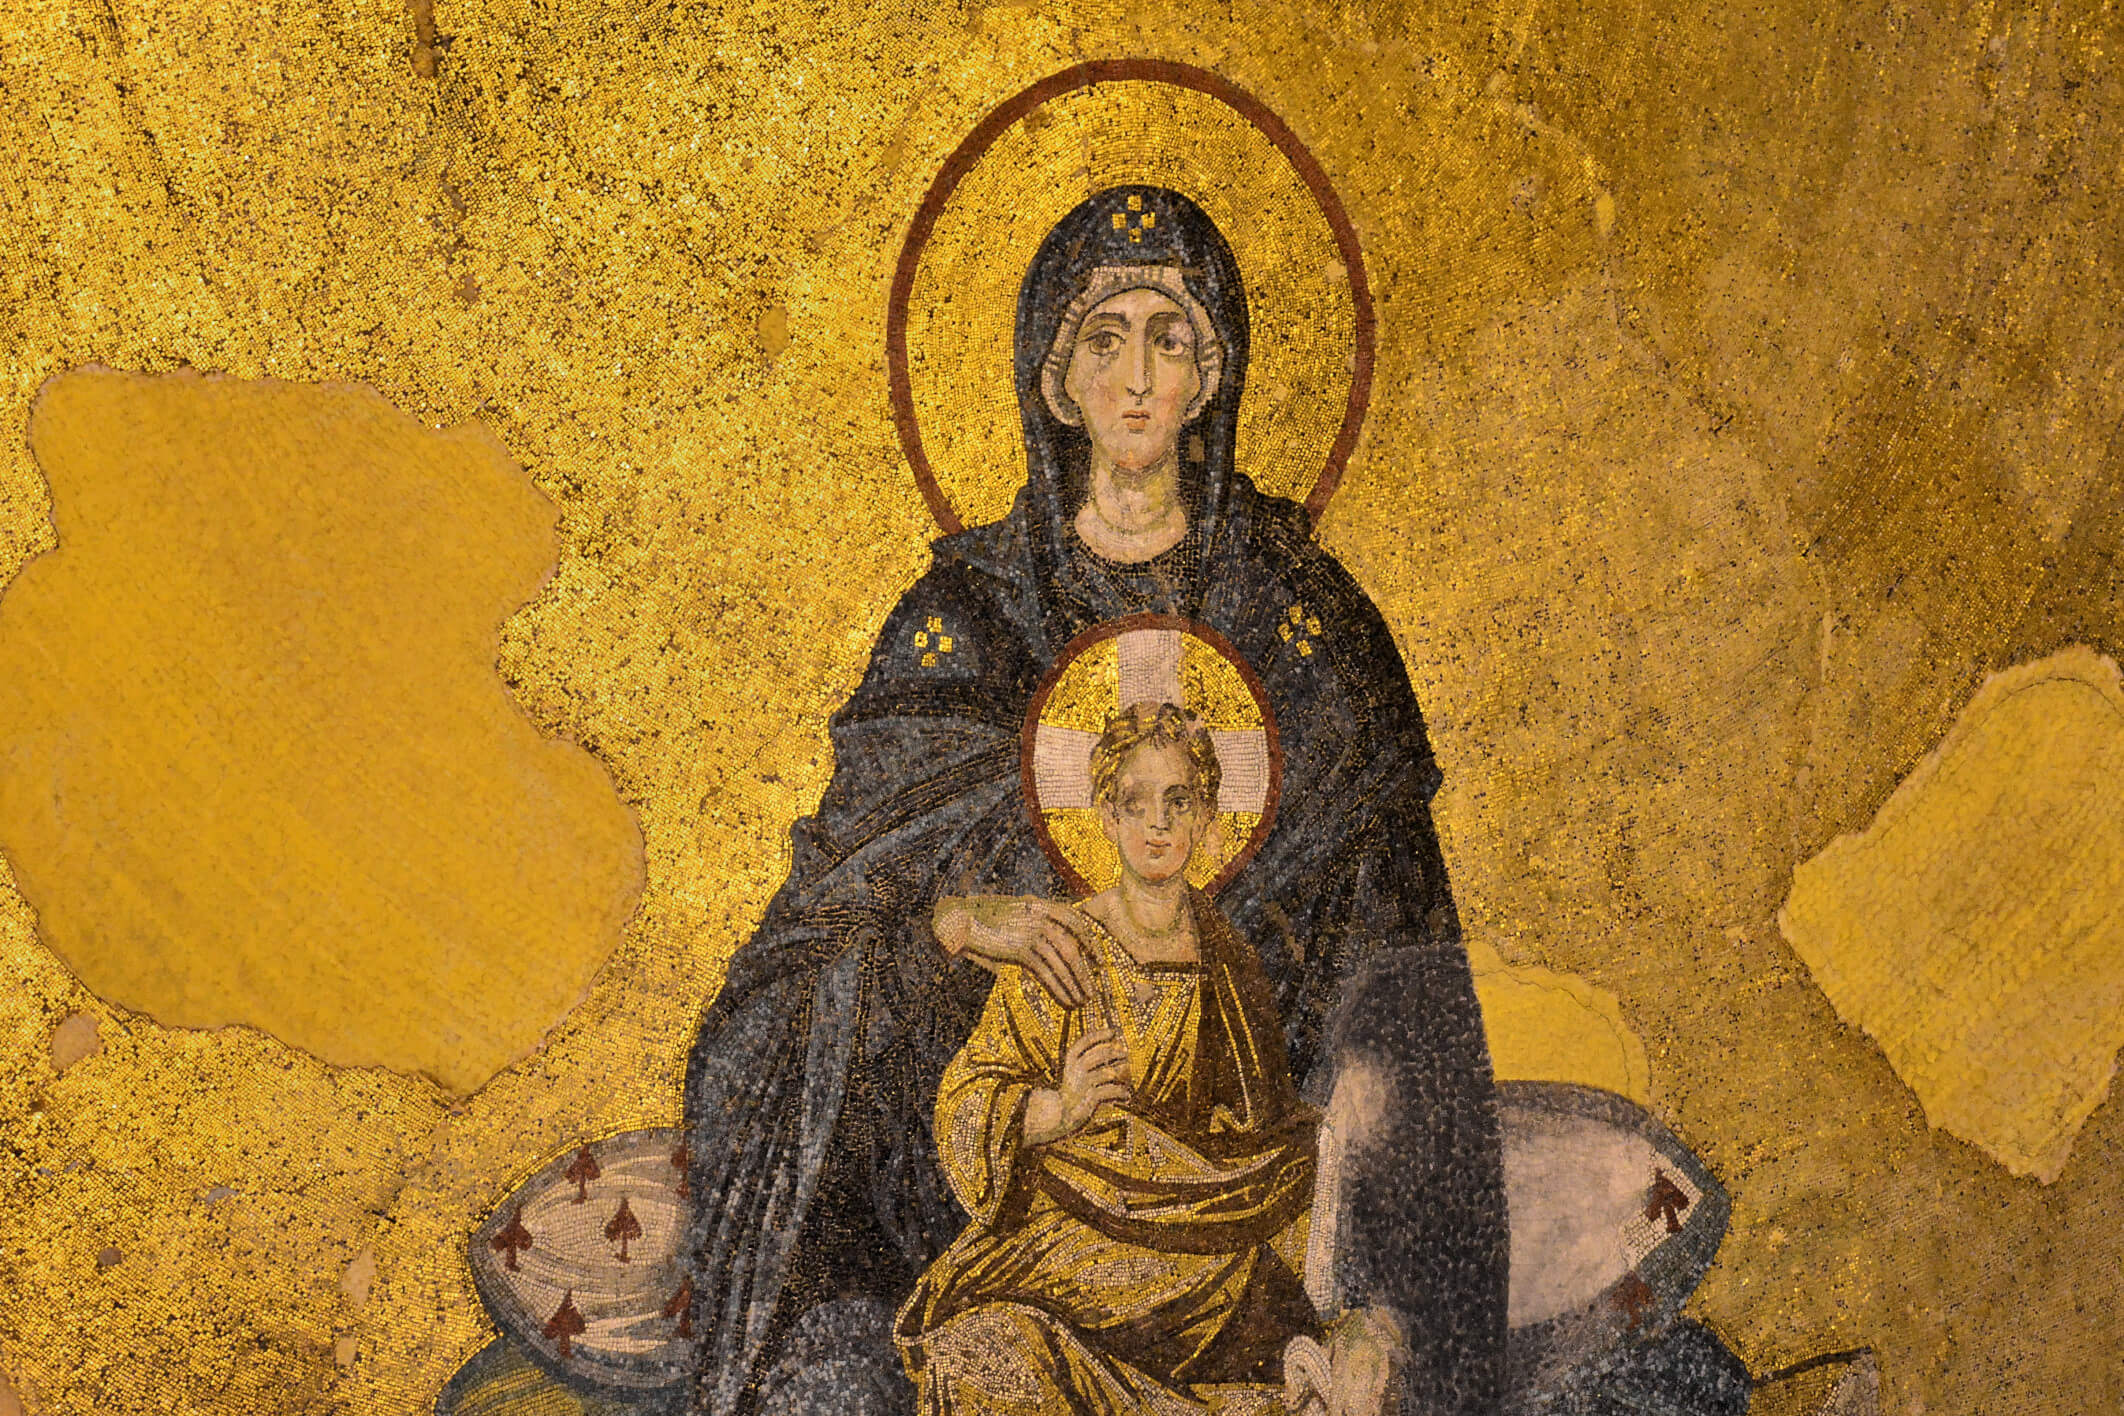 The Virgin Mary and Jesus as a Child mosaic in Hagia Sophia, Istanbul, Turkey, 9th century CE (Hagia Sophia Research Team/Rome and Byzantium)